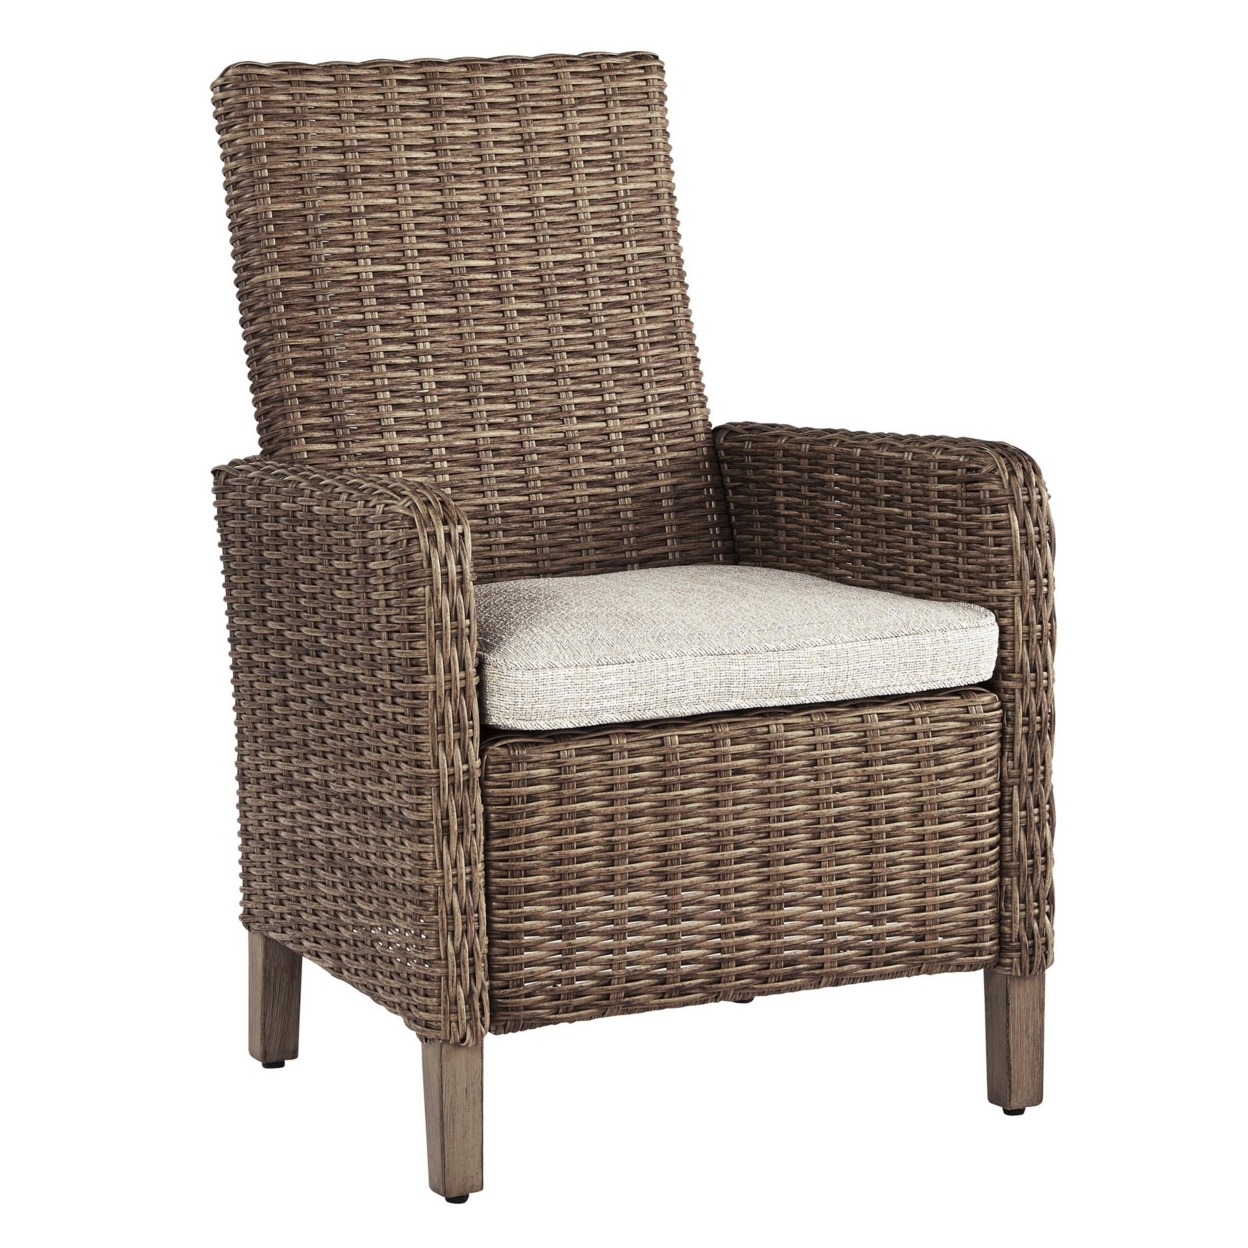 Handwoven Wicker Frame Fabric Upholstered Armchair,Set Of 2,Beige And Brown- Saltoro Sherpi